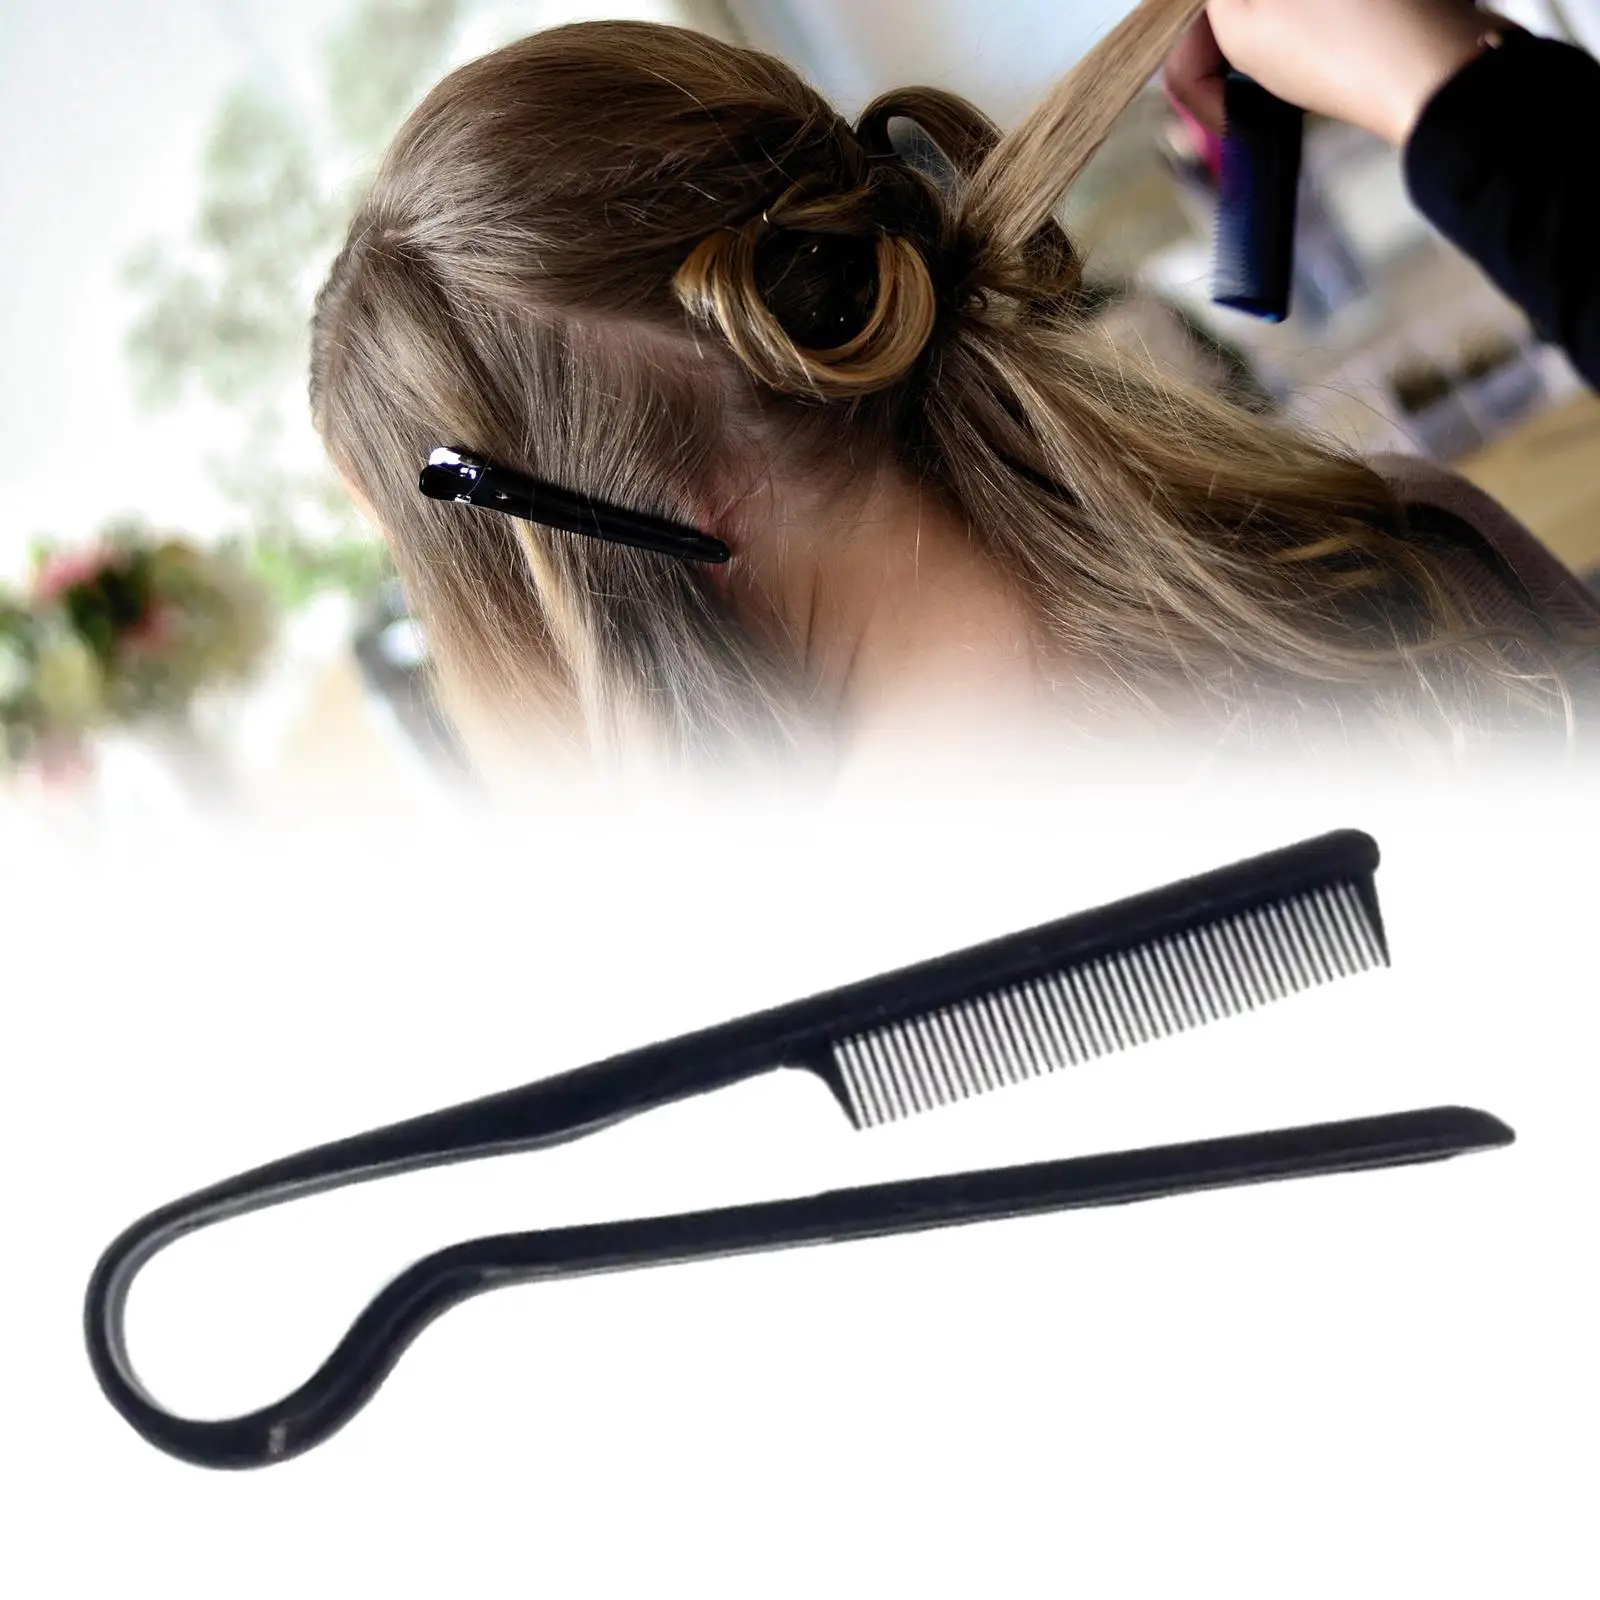 Hair Straightening Comb Straightening Using Iron/blow Dryer Flat Iron Comb Hair Brush Comb for Salon Barber Shop Hairdresser